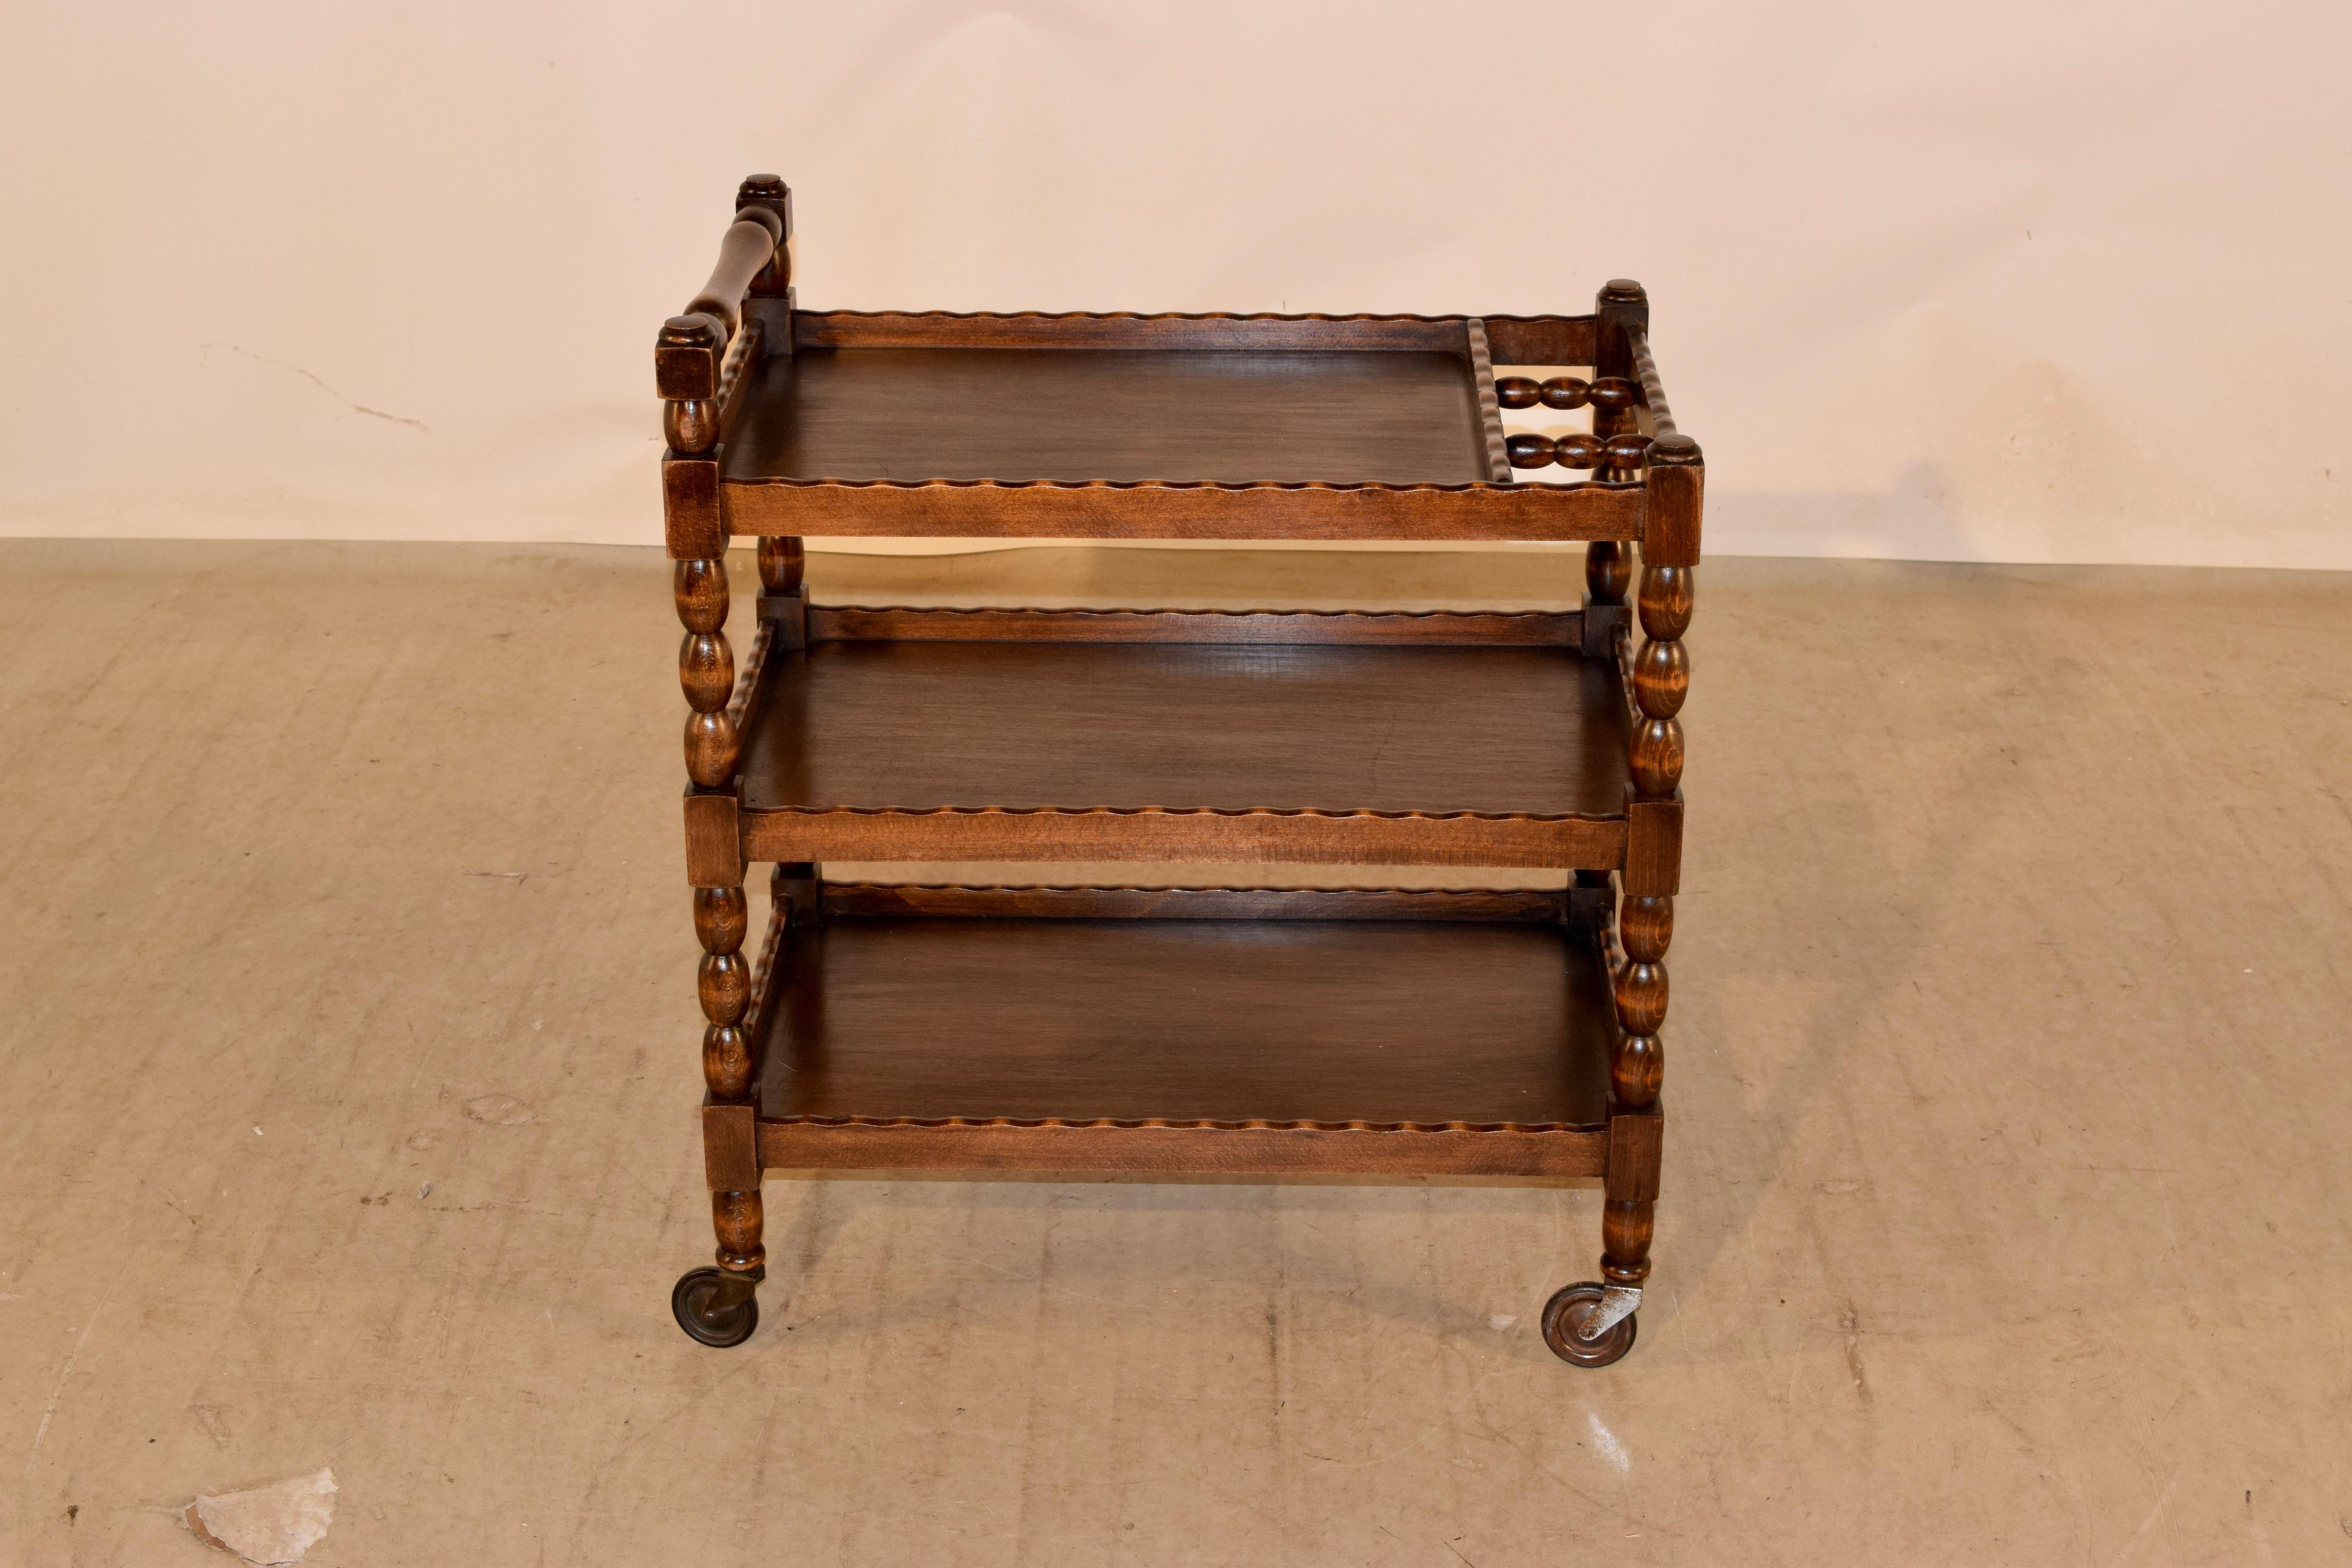 C. 1900 English oak drinks cart with a turned handle over three shelves which have scalloped galleries and hand turned shelf supports and feet. The cart is supported on what appear to be the original casters.